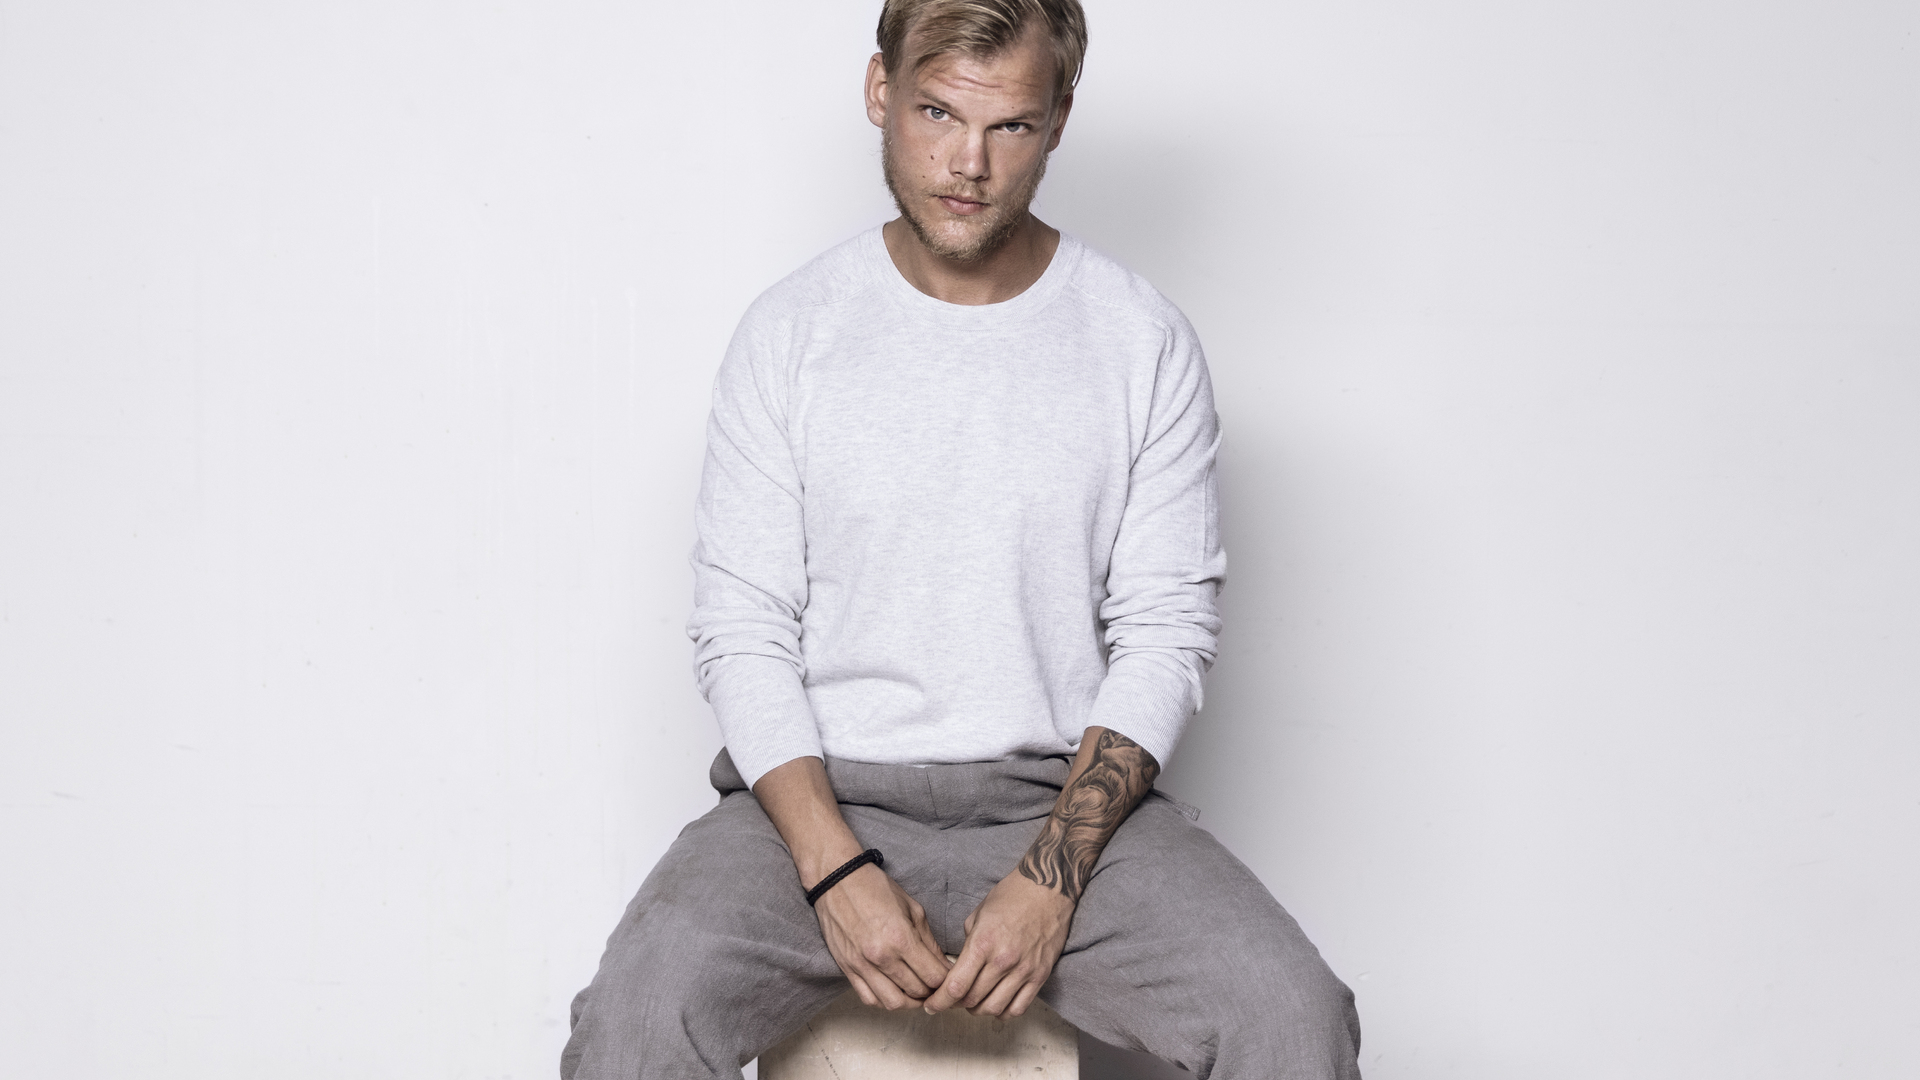 1920x1080 Avicii 5k 2018 Laptop Full HD 1080P HD 4k Wallpapers, Images,  Backgrounds, Photos and Pictures